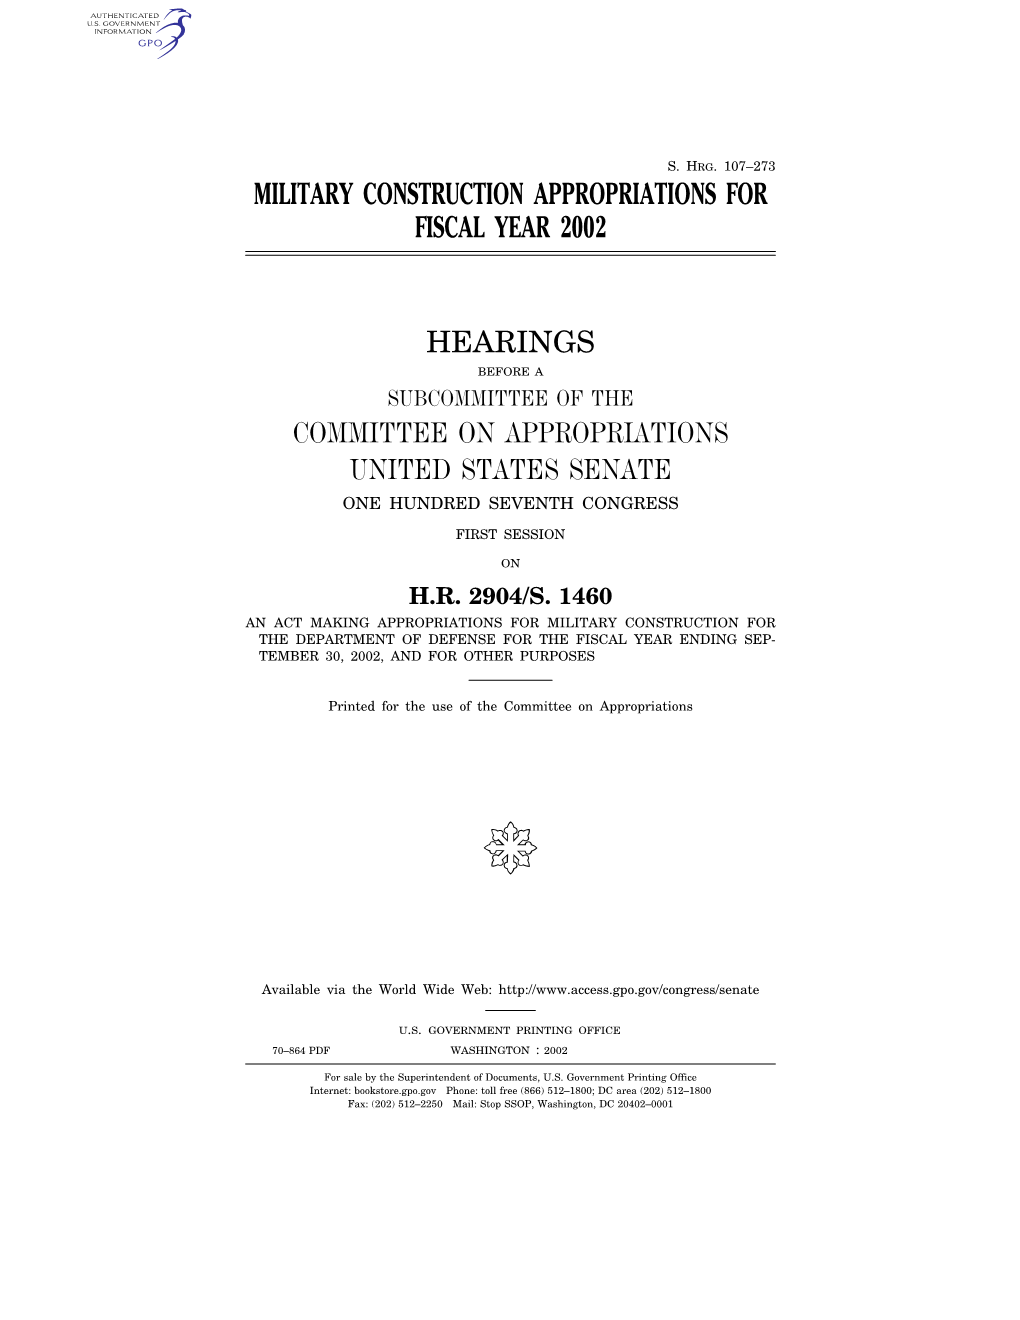 Military Construction Appropriations for Fiscal Year 2002 Hearings